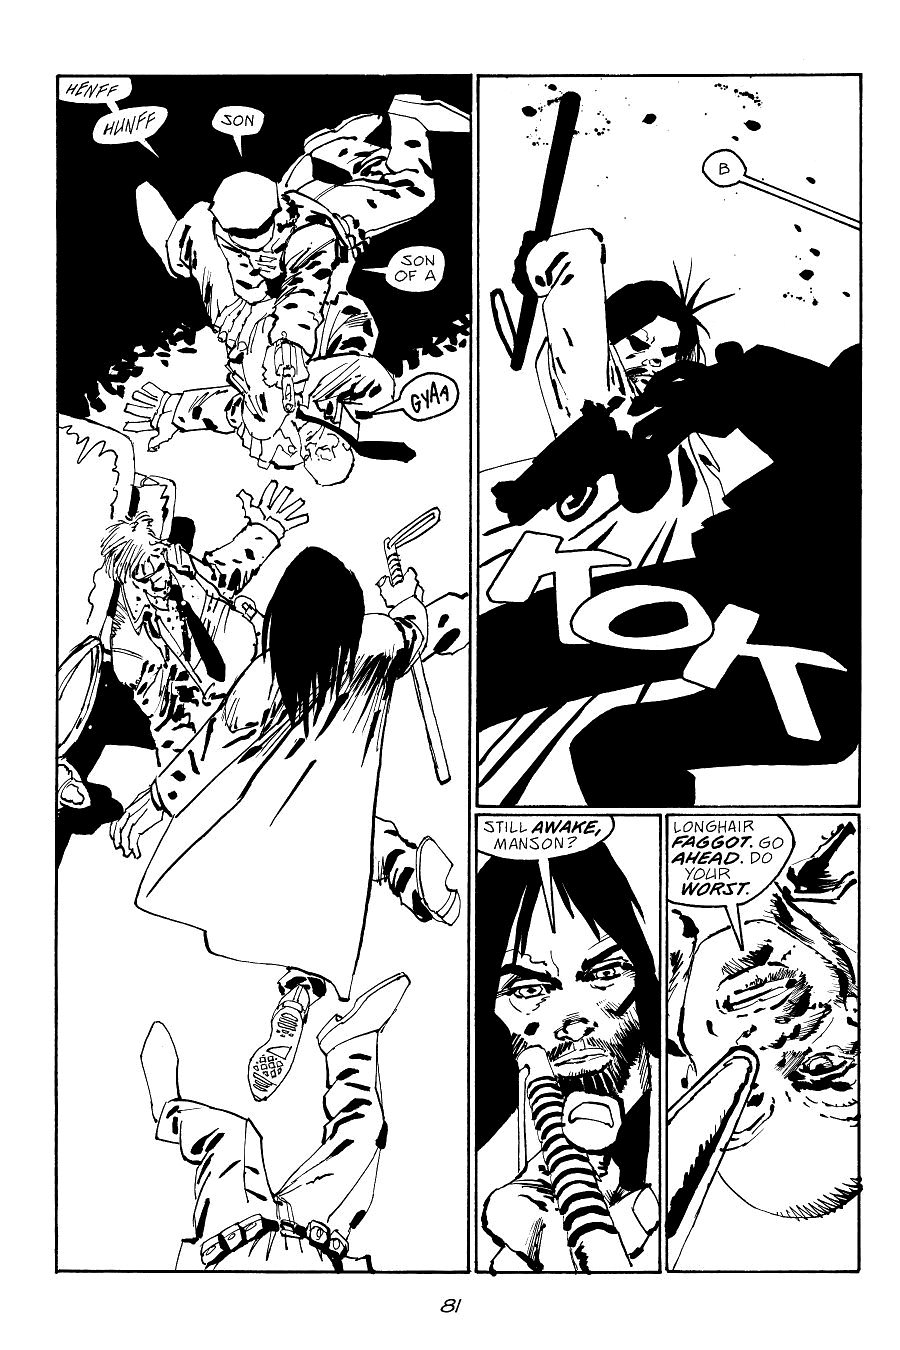 page 81 of sin city 7 hell and back